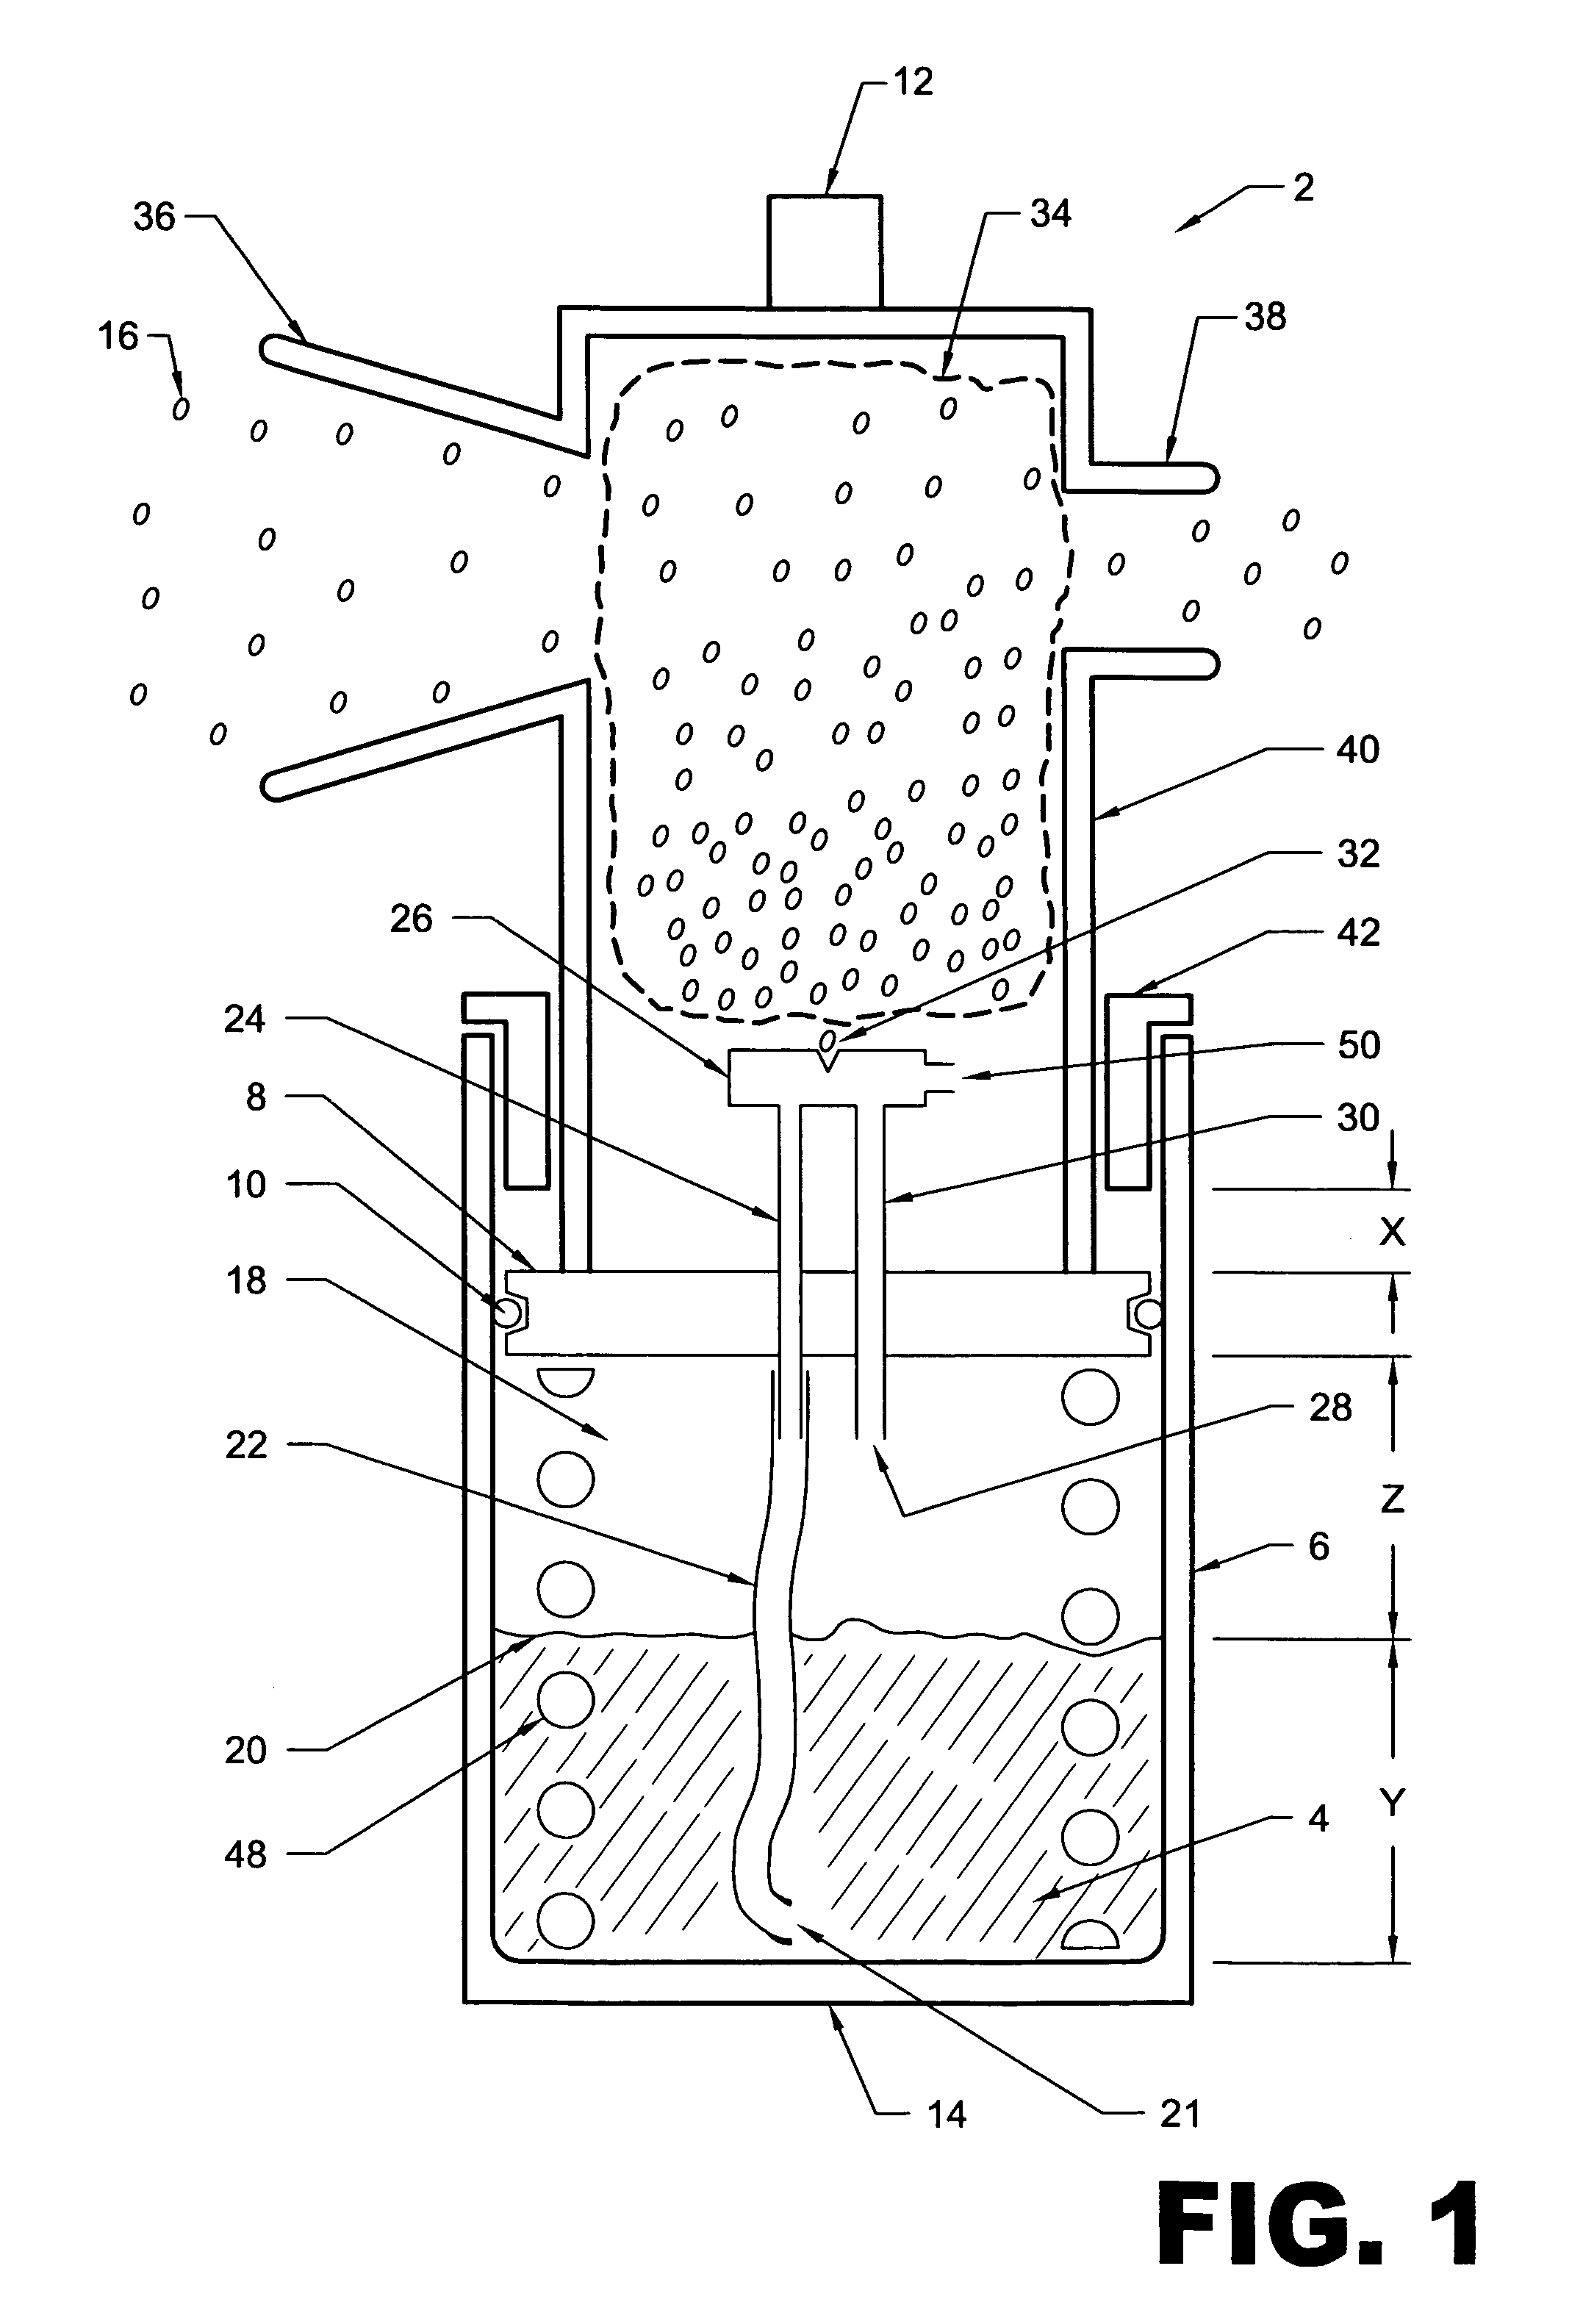 Methods and apparatus to prevent, treat, and cure the symptoms of nausea caused by chemotherapy treatments of human cancers